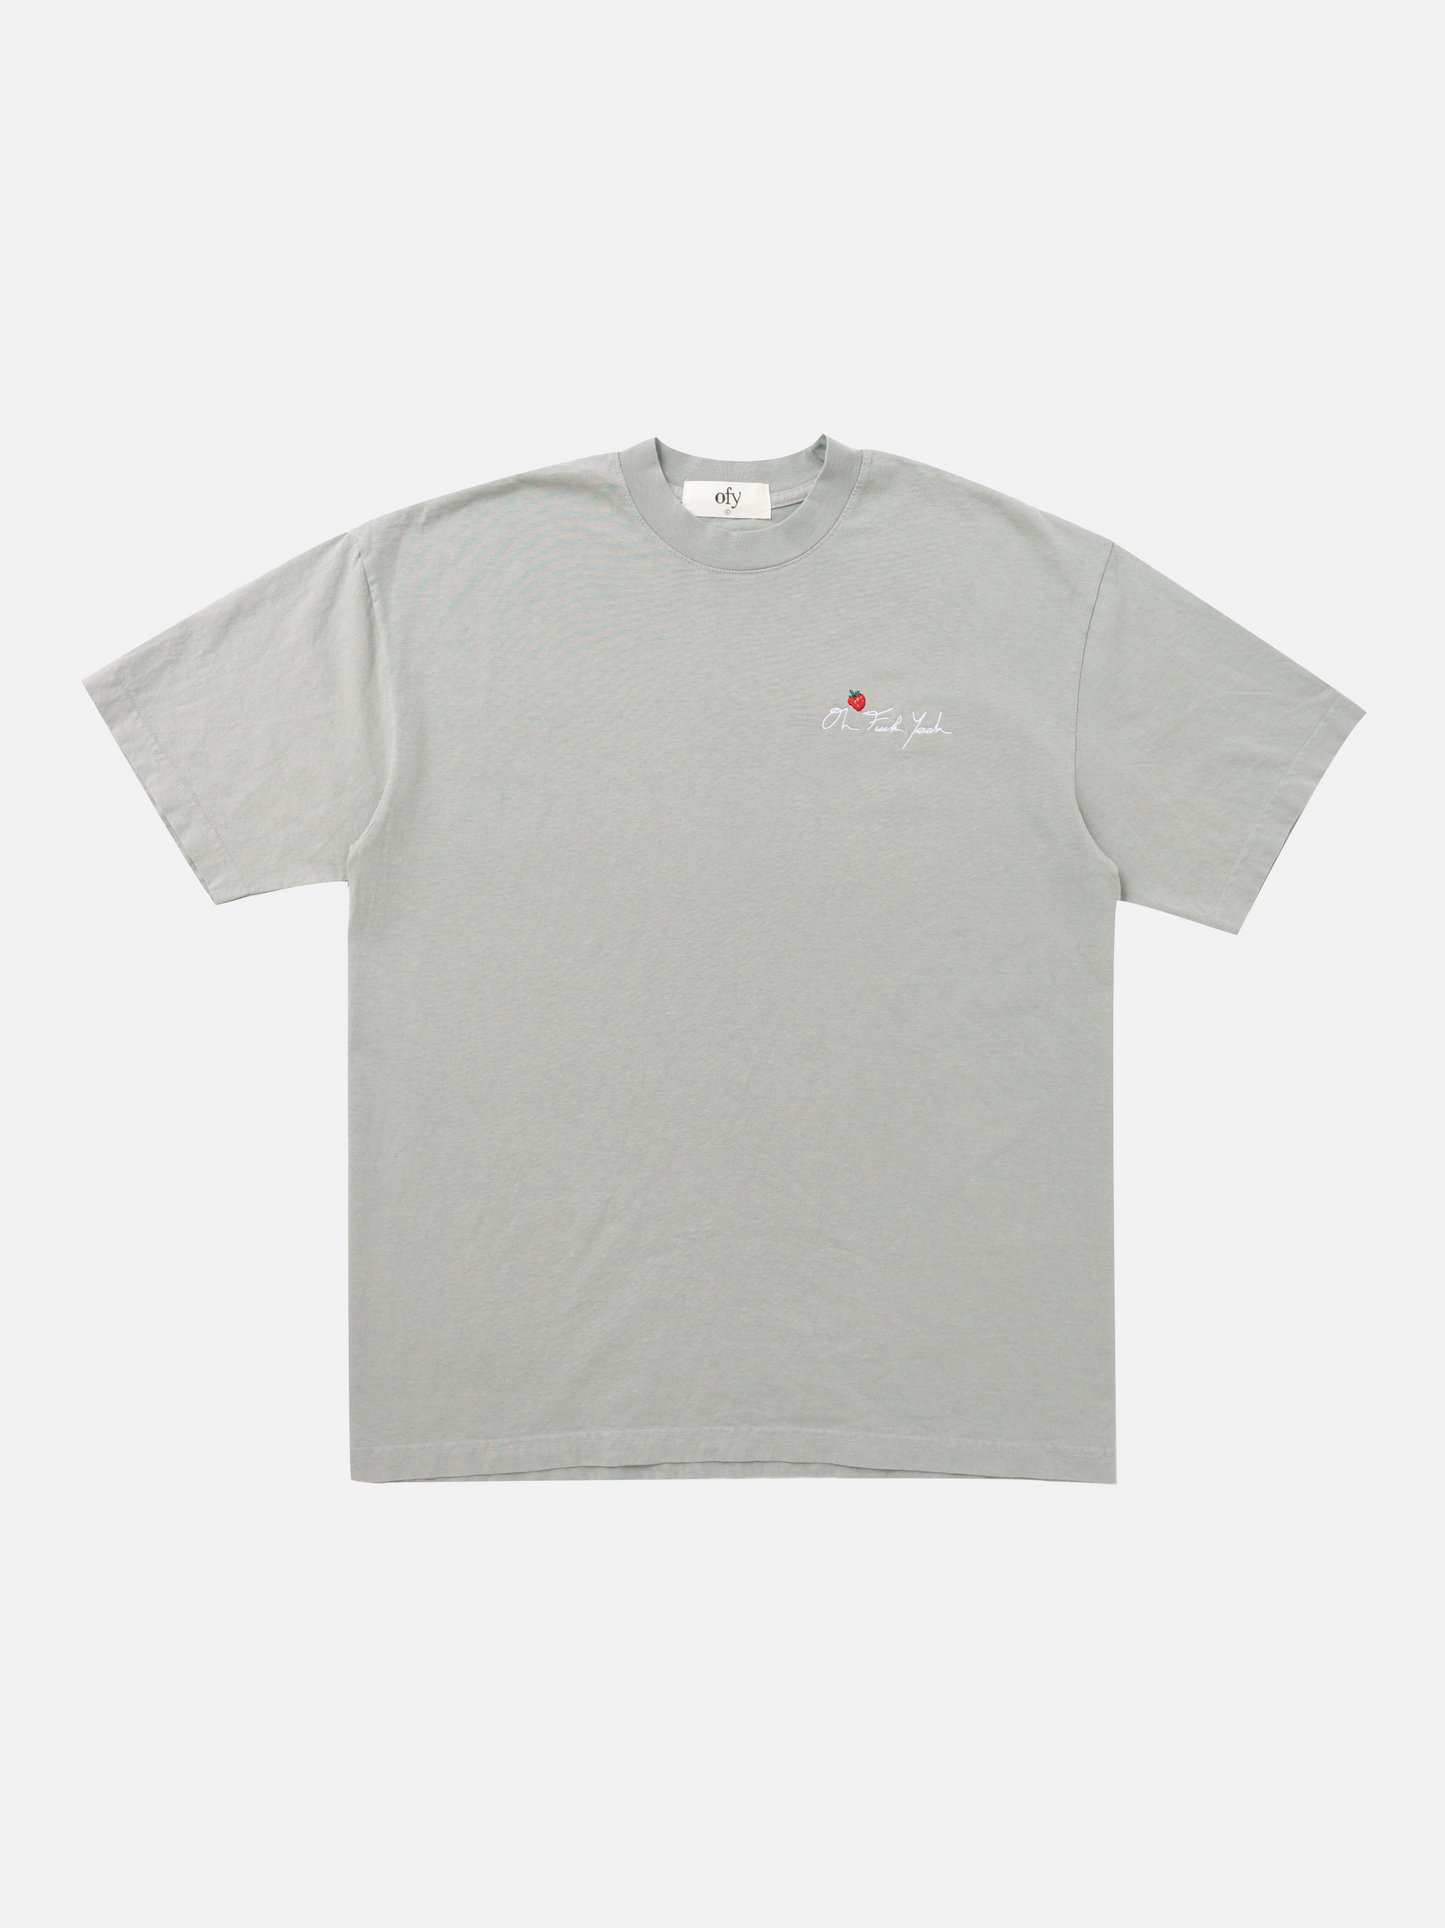 Classic Tee - Strawberry Embroidery